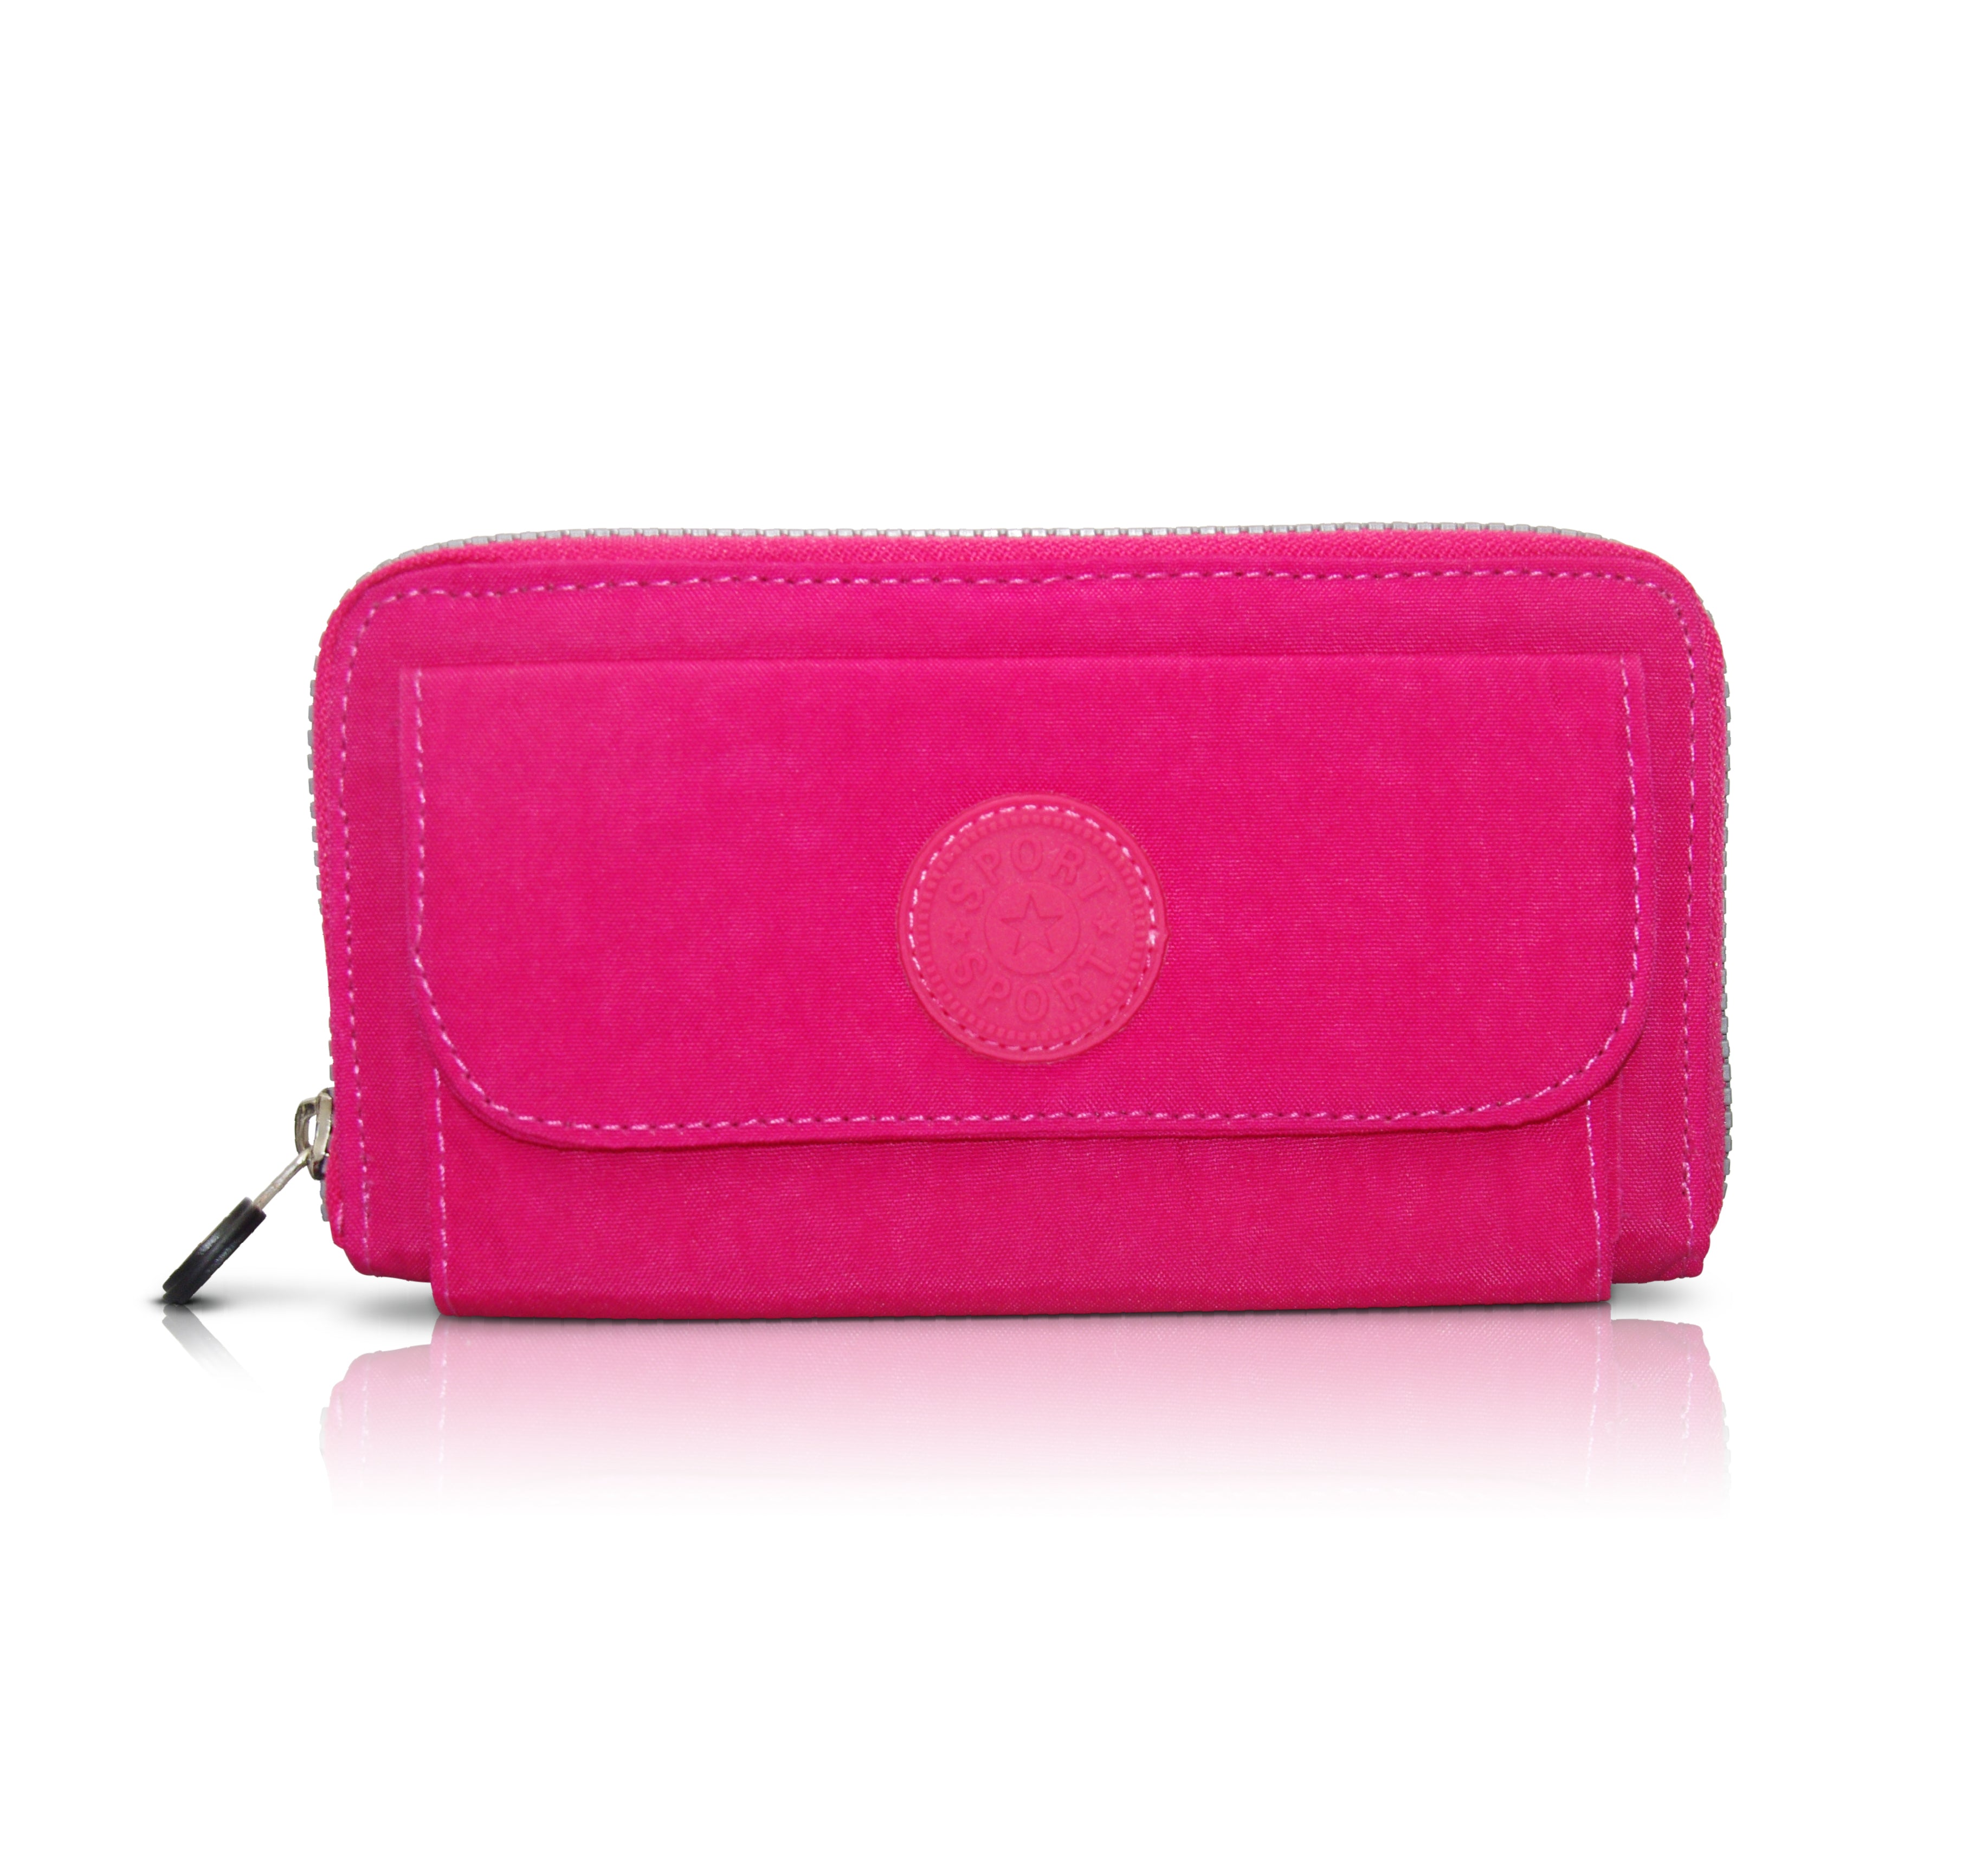 Cienna - KP19008 Large Zip Wallet with Phone Pouch - Pink